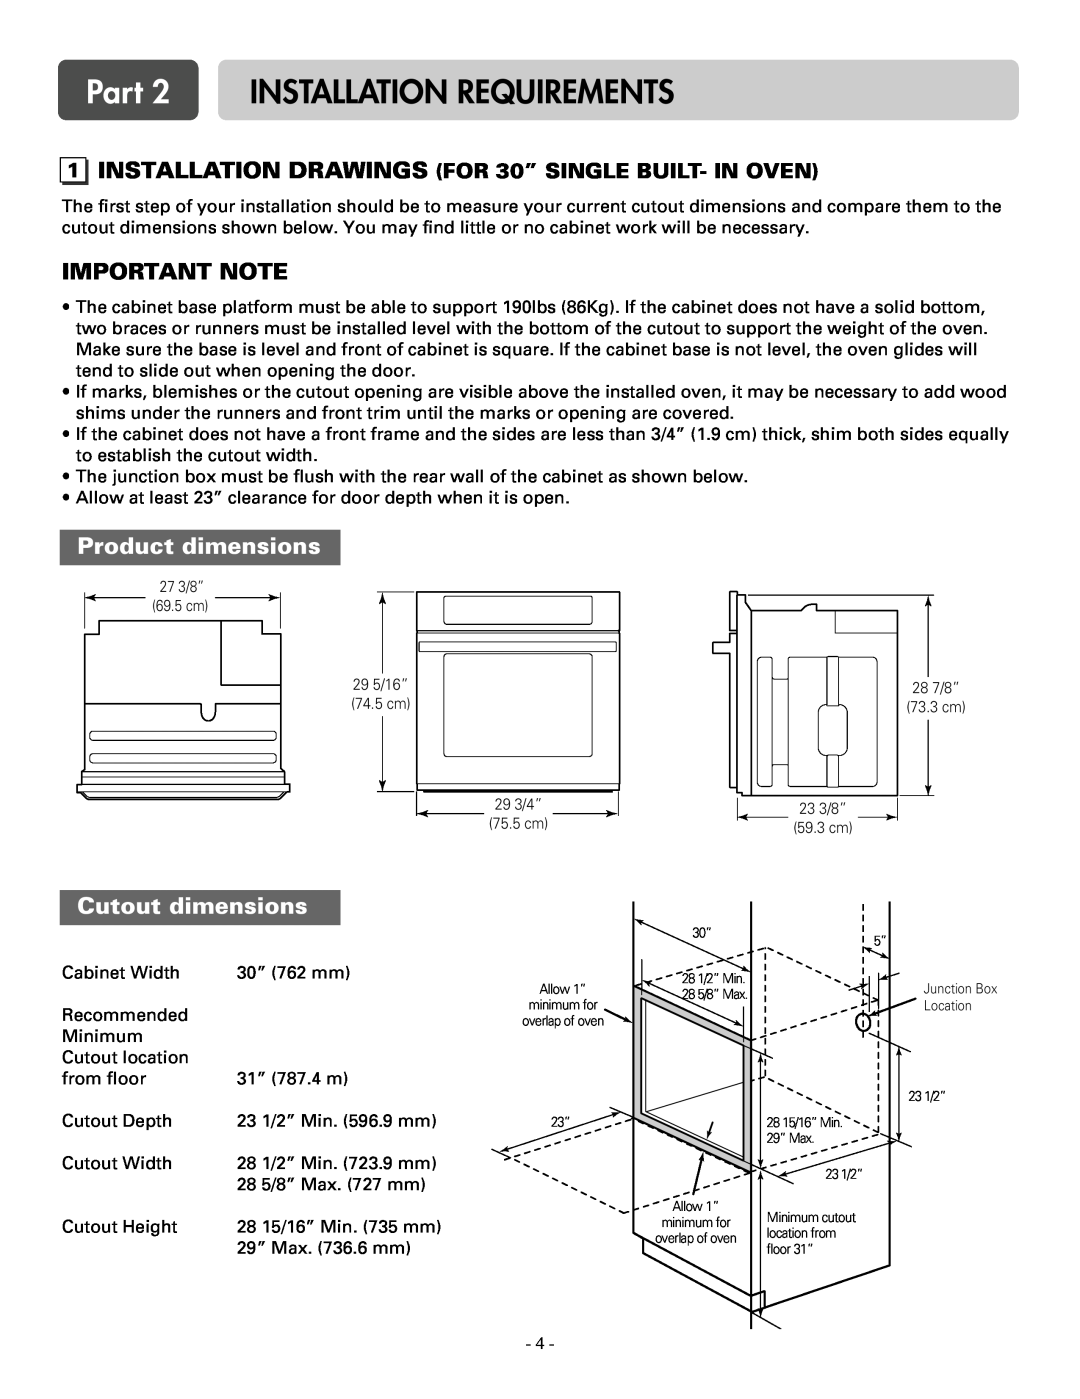 LG Electronics LSWS305ST Part 2 INSTALLATION REQUIREMENTS, Product dimensions, Cutout dimensions, Important Note 